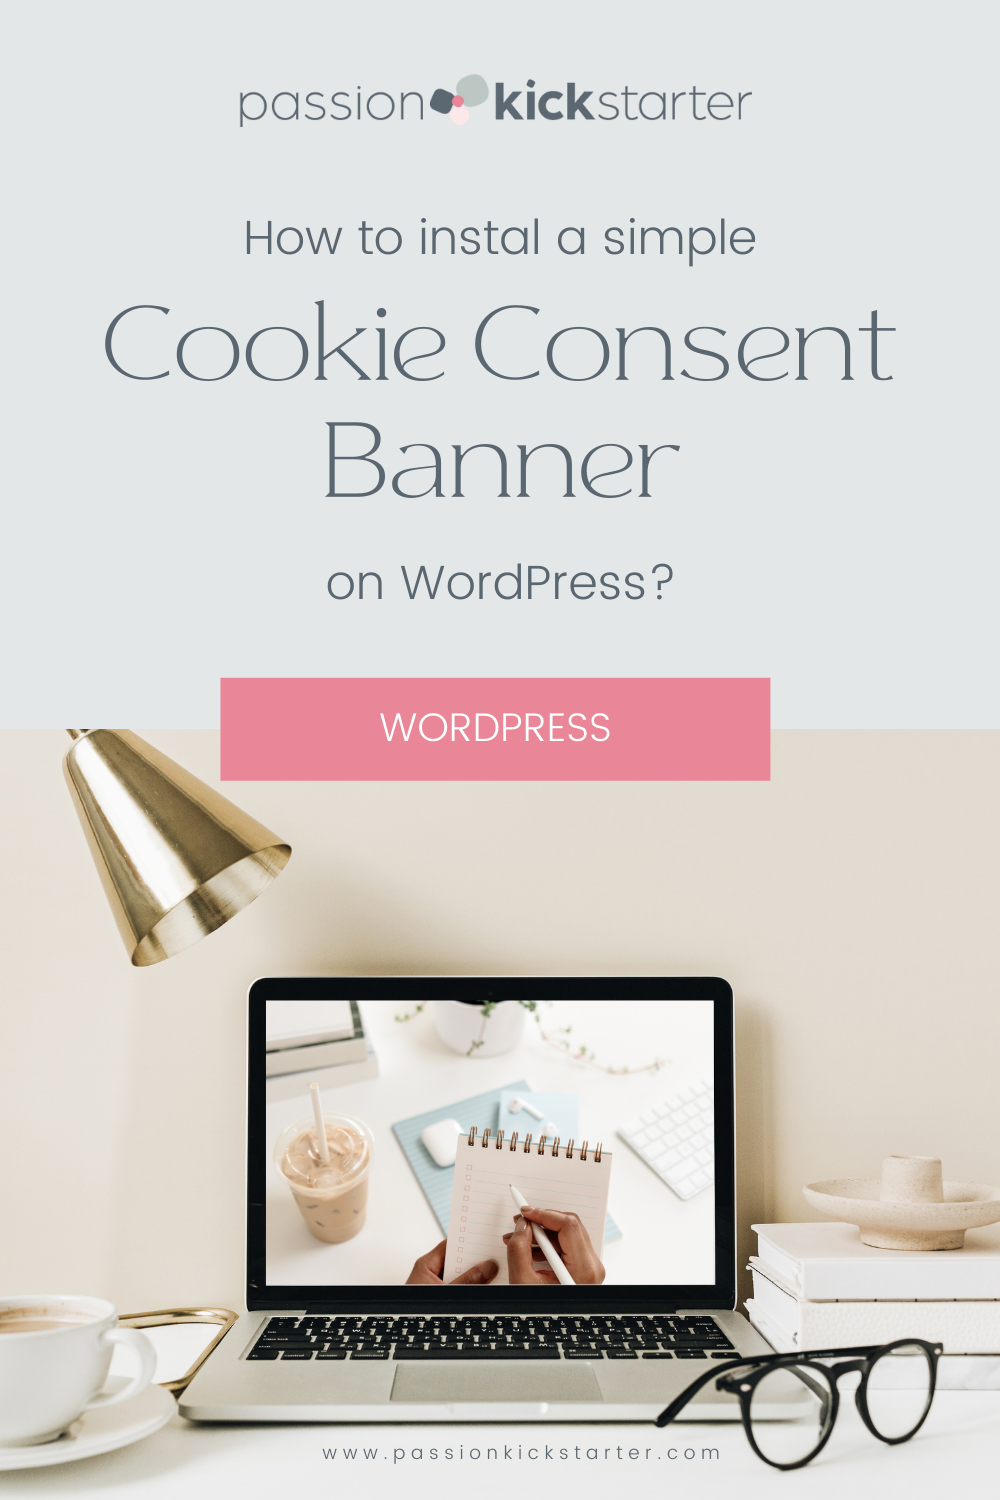 How-to-install-cookie-concent-banner-wordpress-04